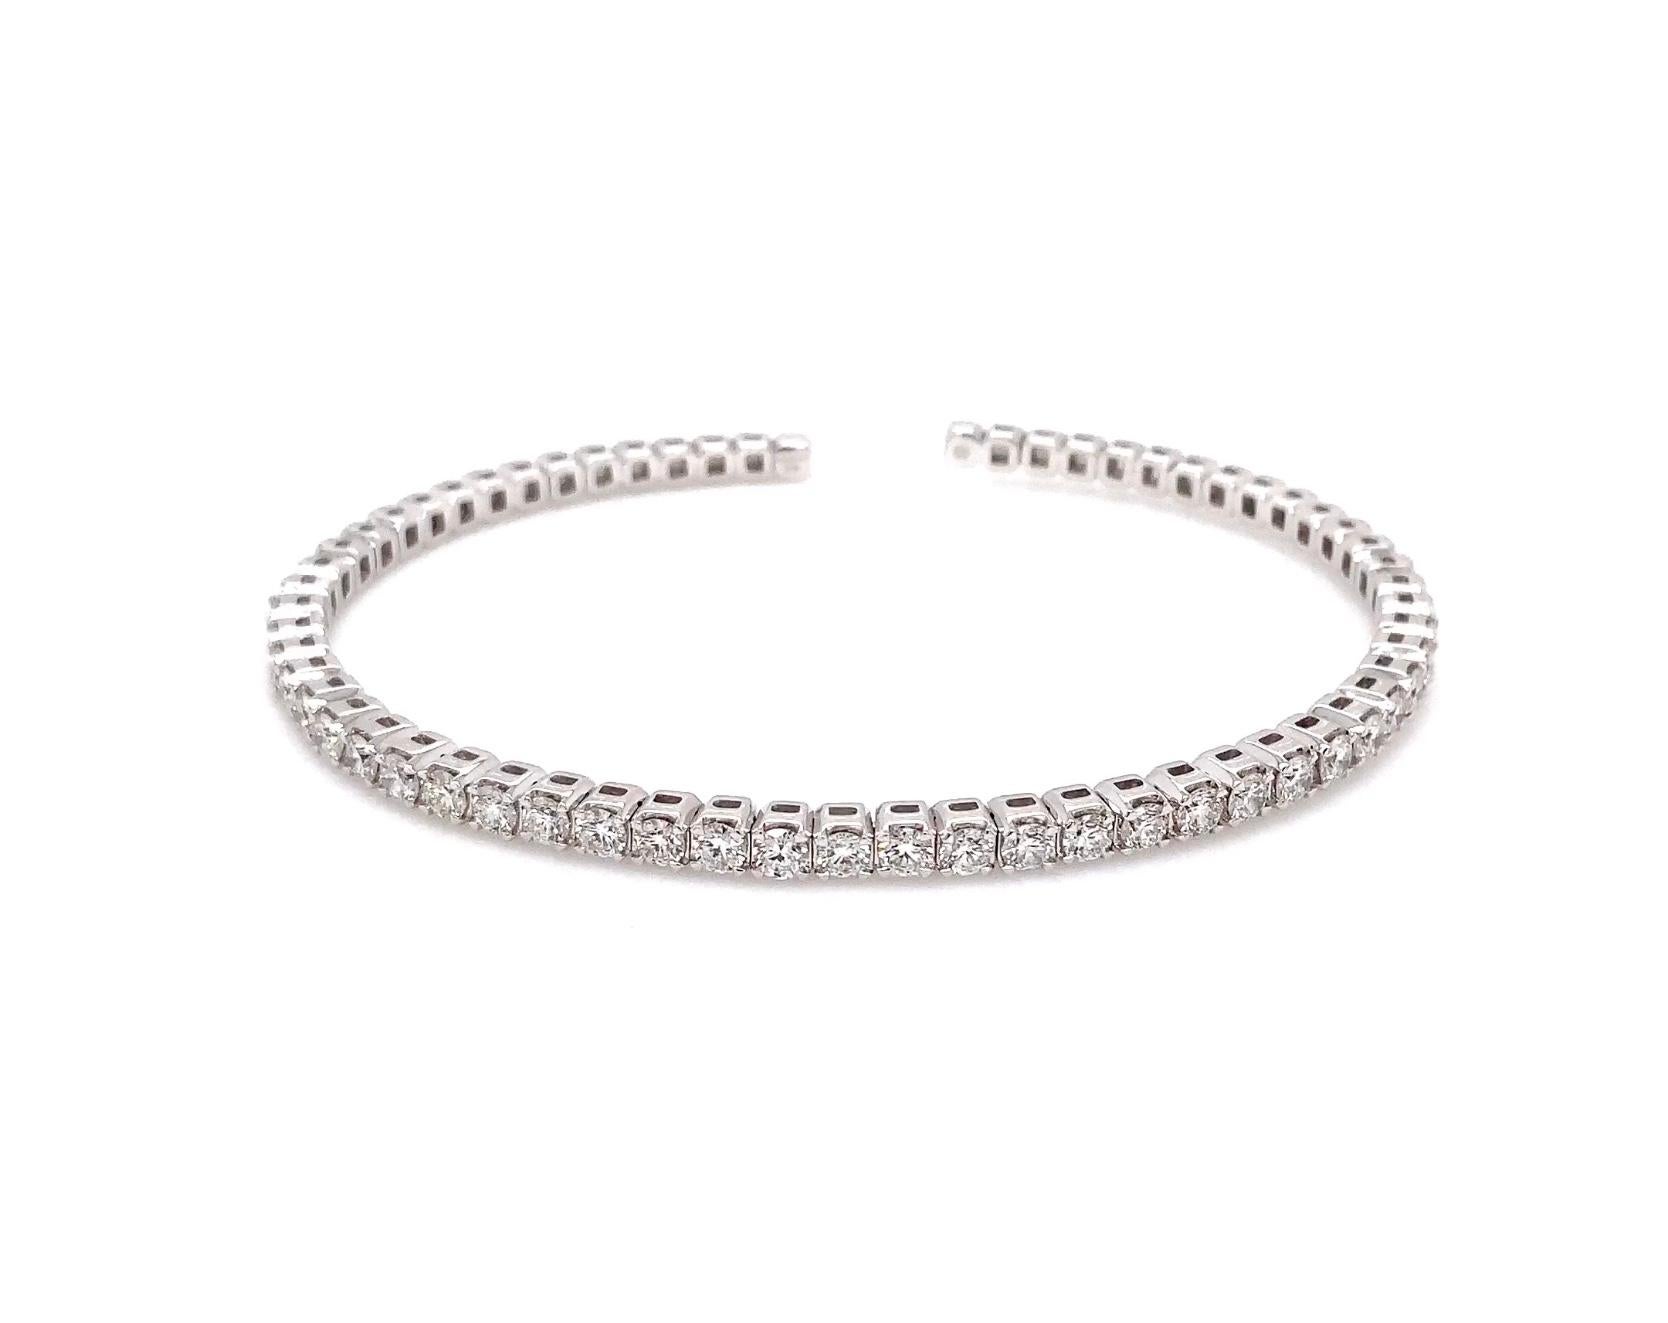 This exquisite flexi cuff from the Memoire Collection boasts 30 Round Brilliant Cut Diamonds, delivering a total of 1.50 carats of F-Colored VS1 Clarity diamonds. The diamonds' Excellent make and polish are the result of their Ideal cut, while the